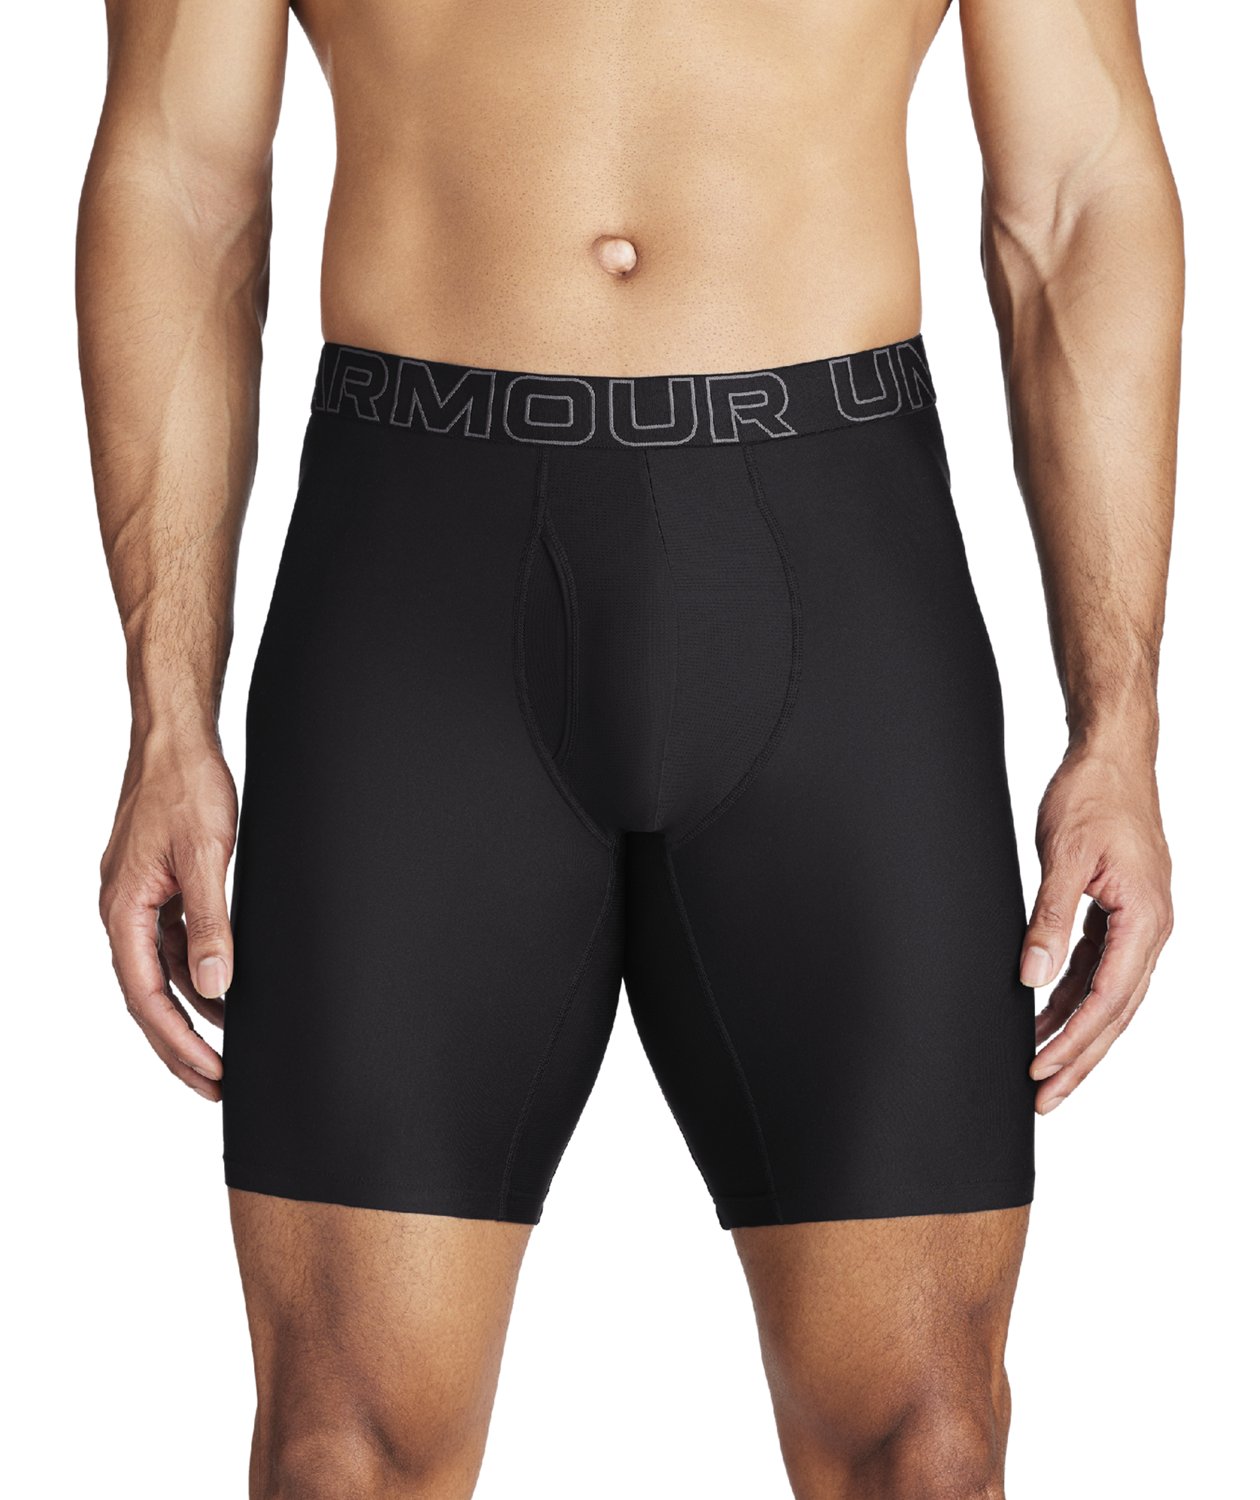 Under Armour Mens Performance Tech 9 in Boxer Briefs 3-Pack